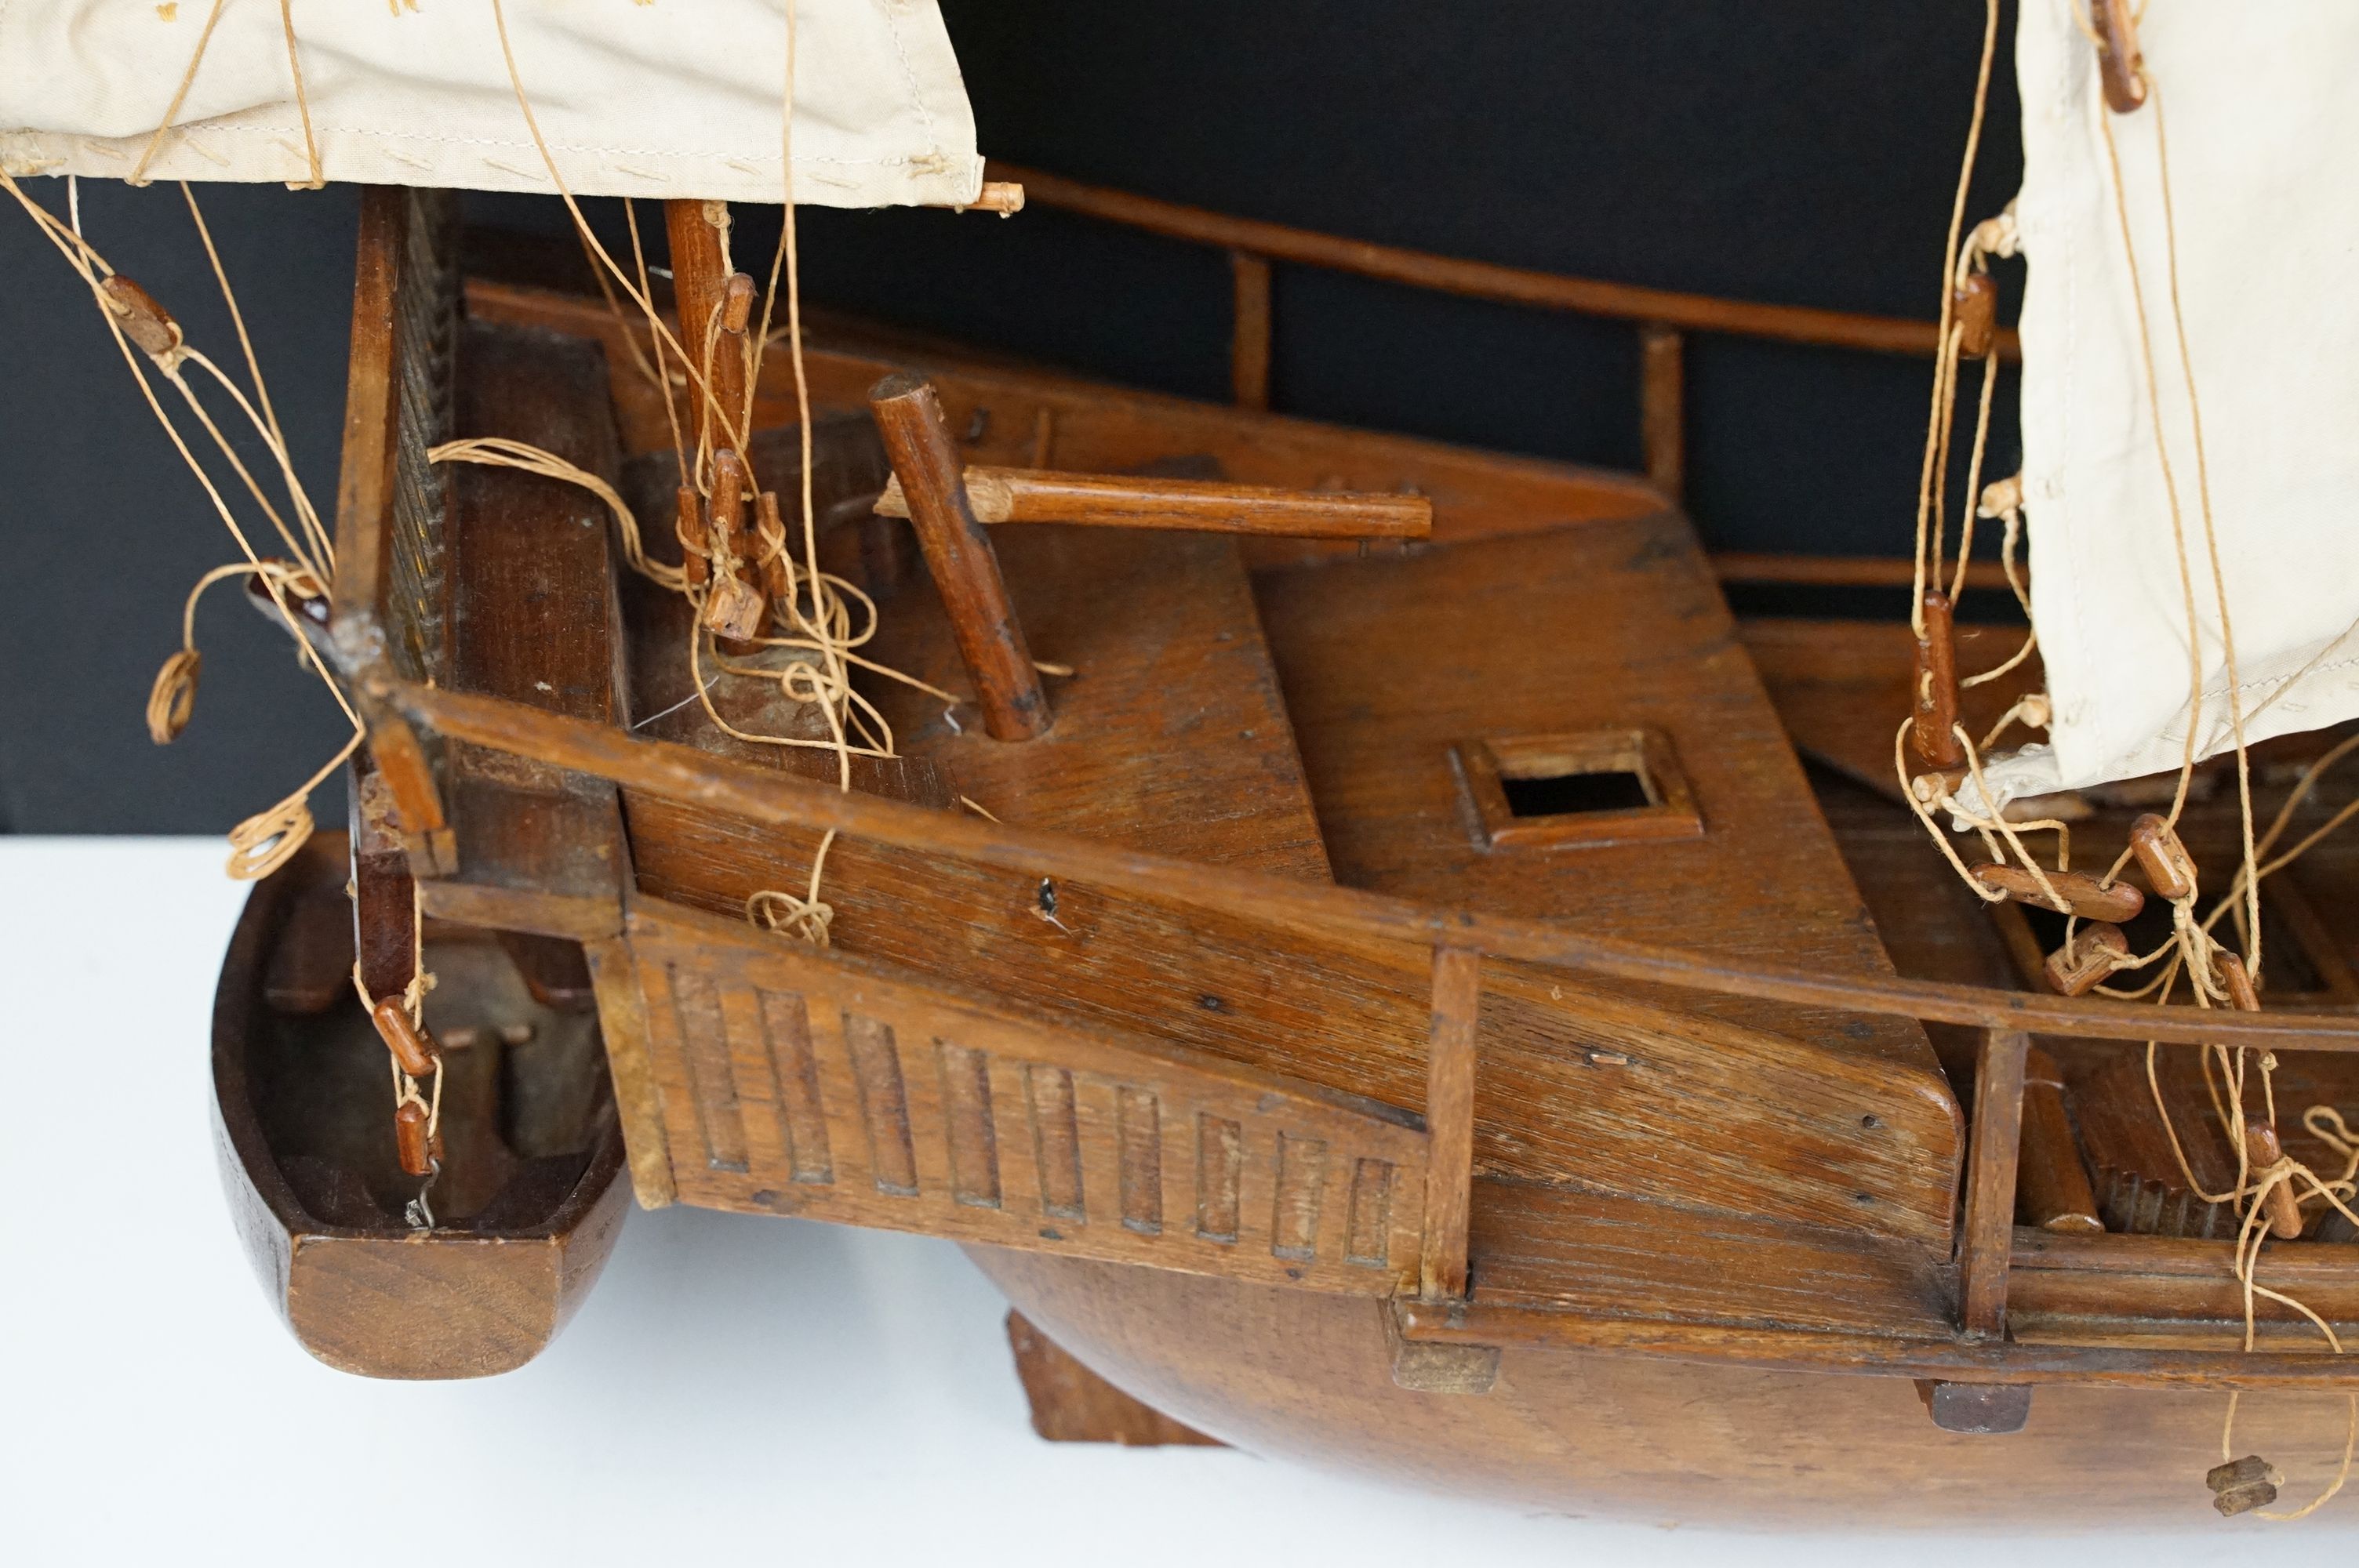 20th Century scratch built junk ship model having three sails, rope detailing, and life boat. - Image 4 of 6